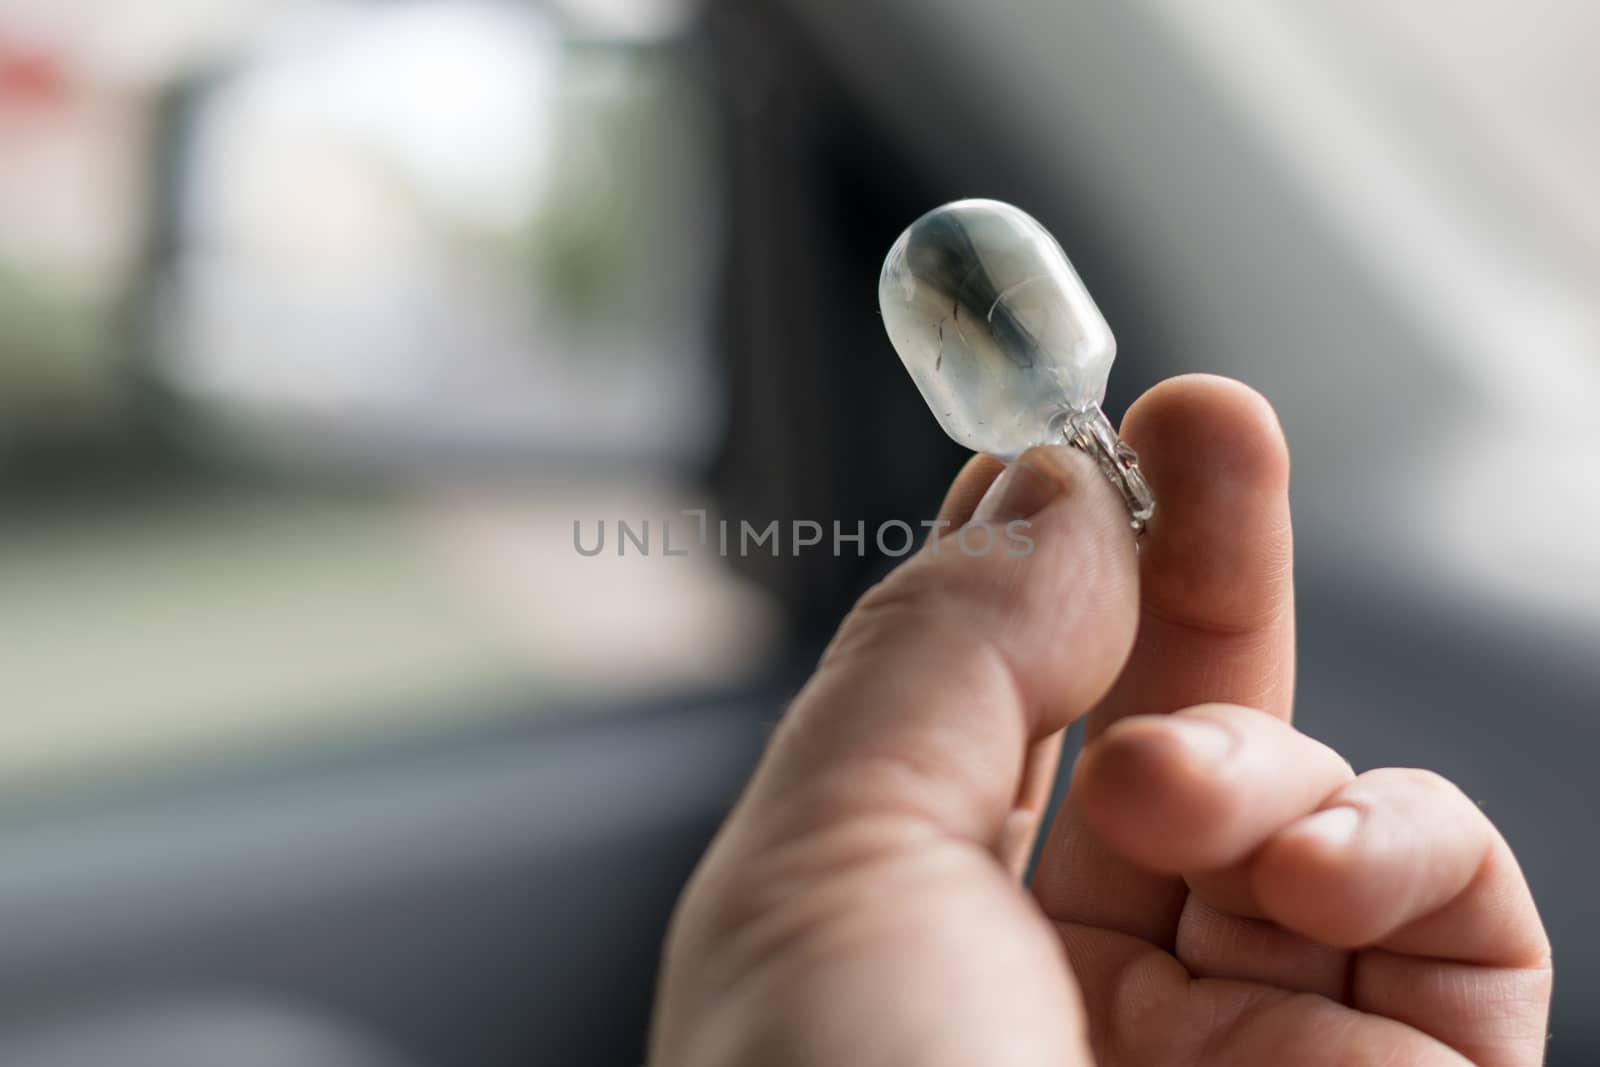 the fingers of the human hand hold the damaged light bulb in the car by jk3030